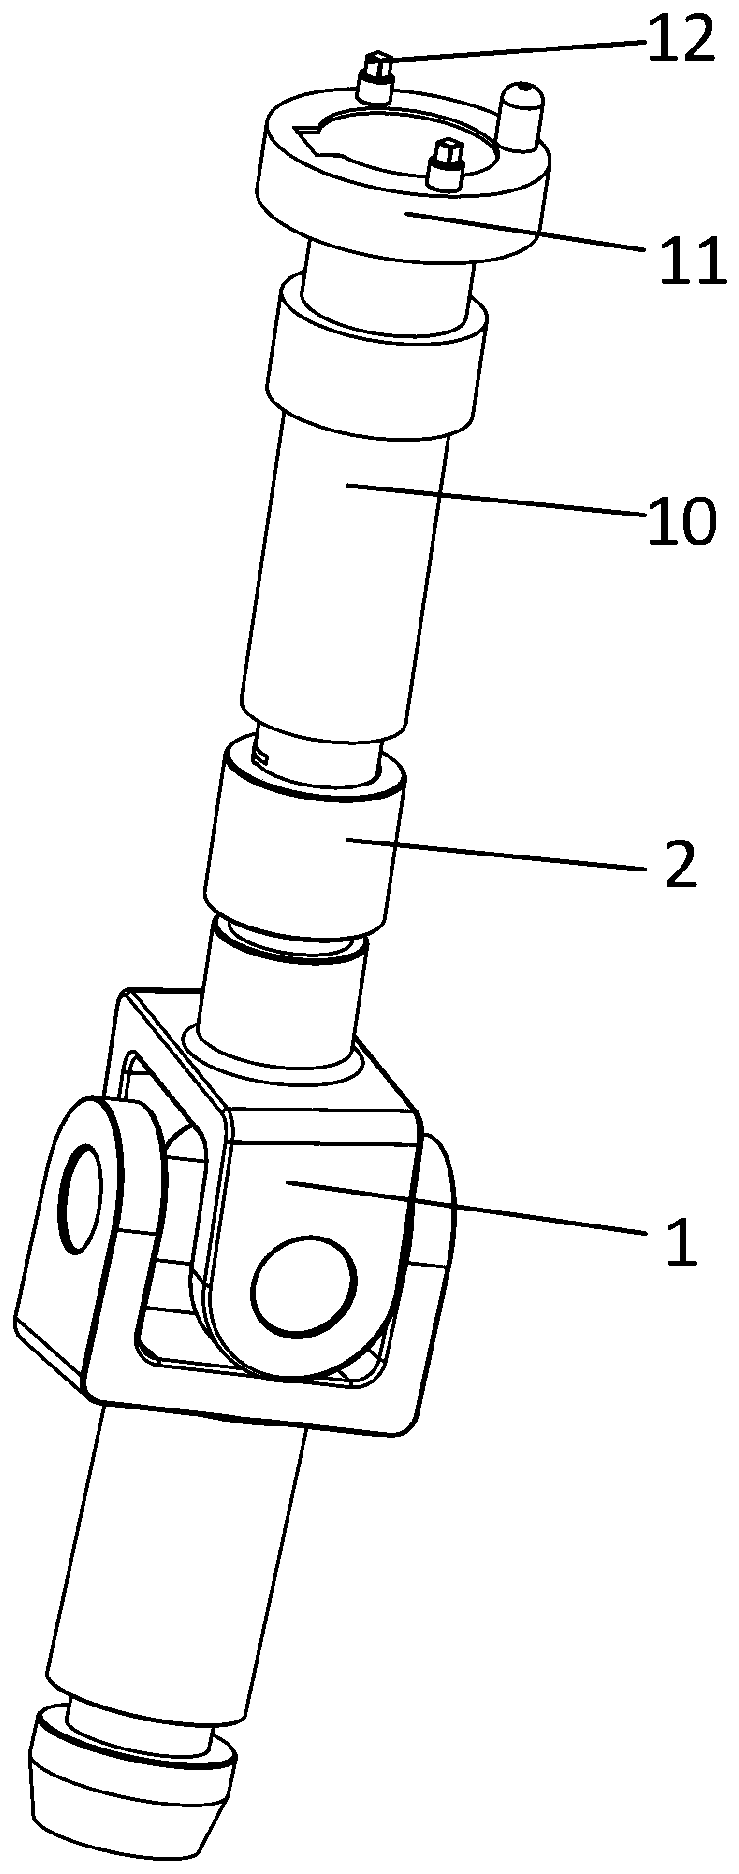 A multi-degree-of-freedom quick connection device